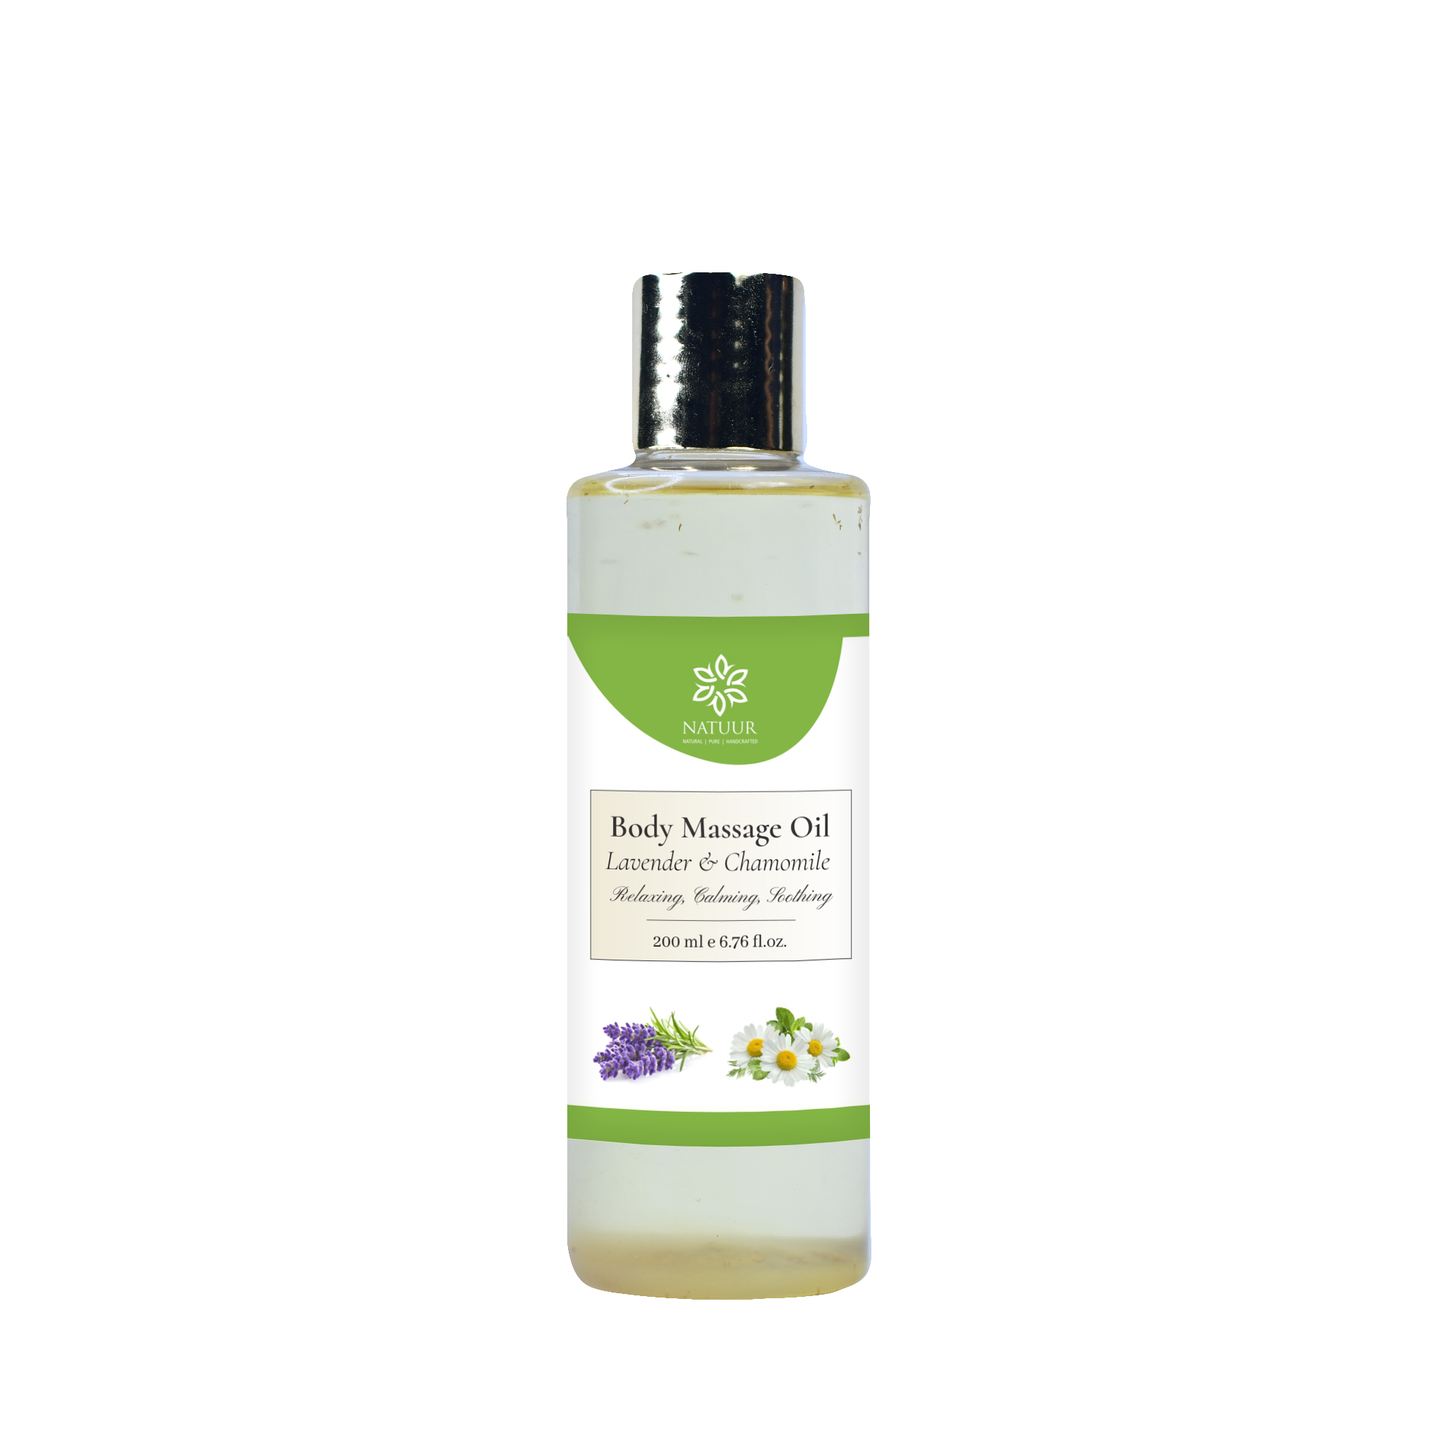 Body Massage Oil Lavender Chamomile - relaxing, calming, soothing - Natuur.in